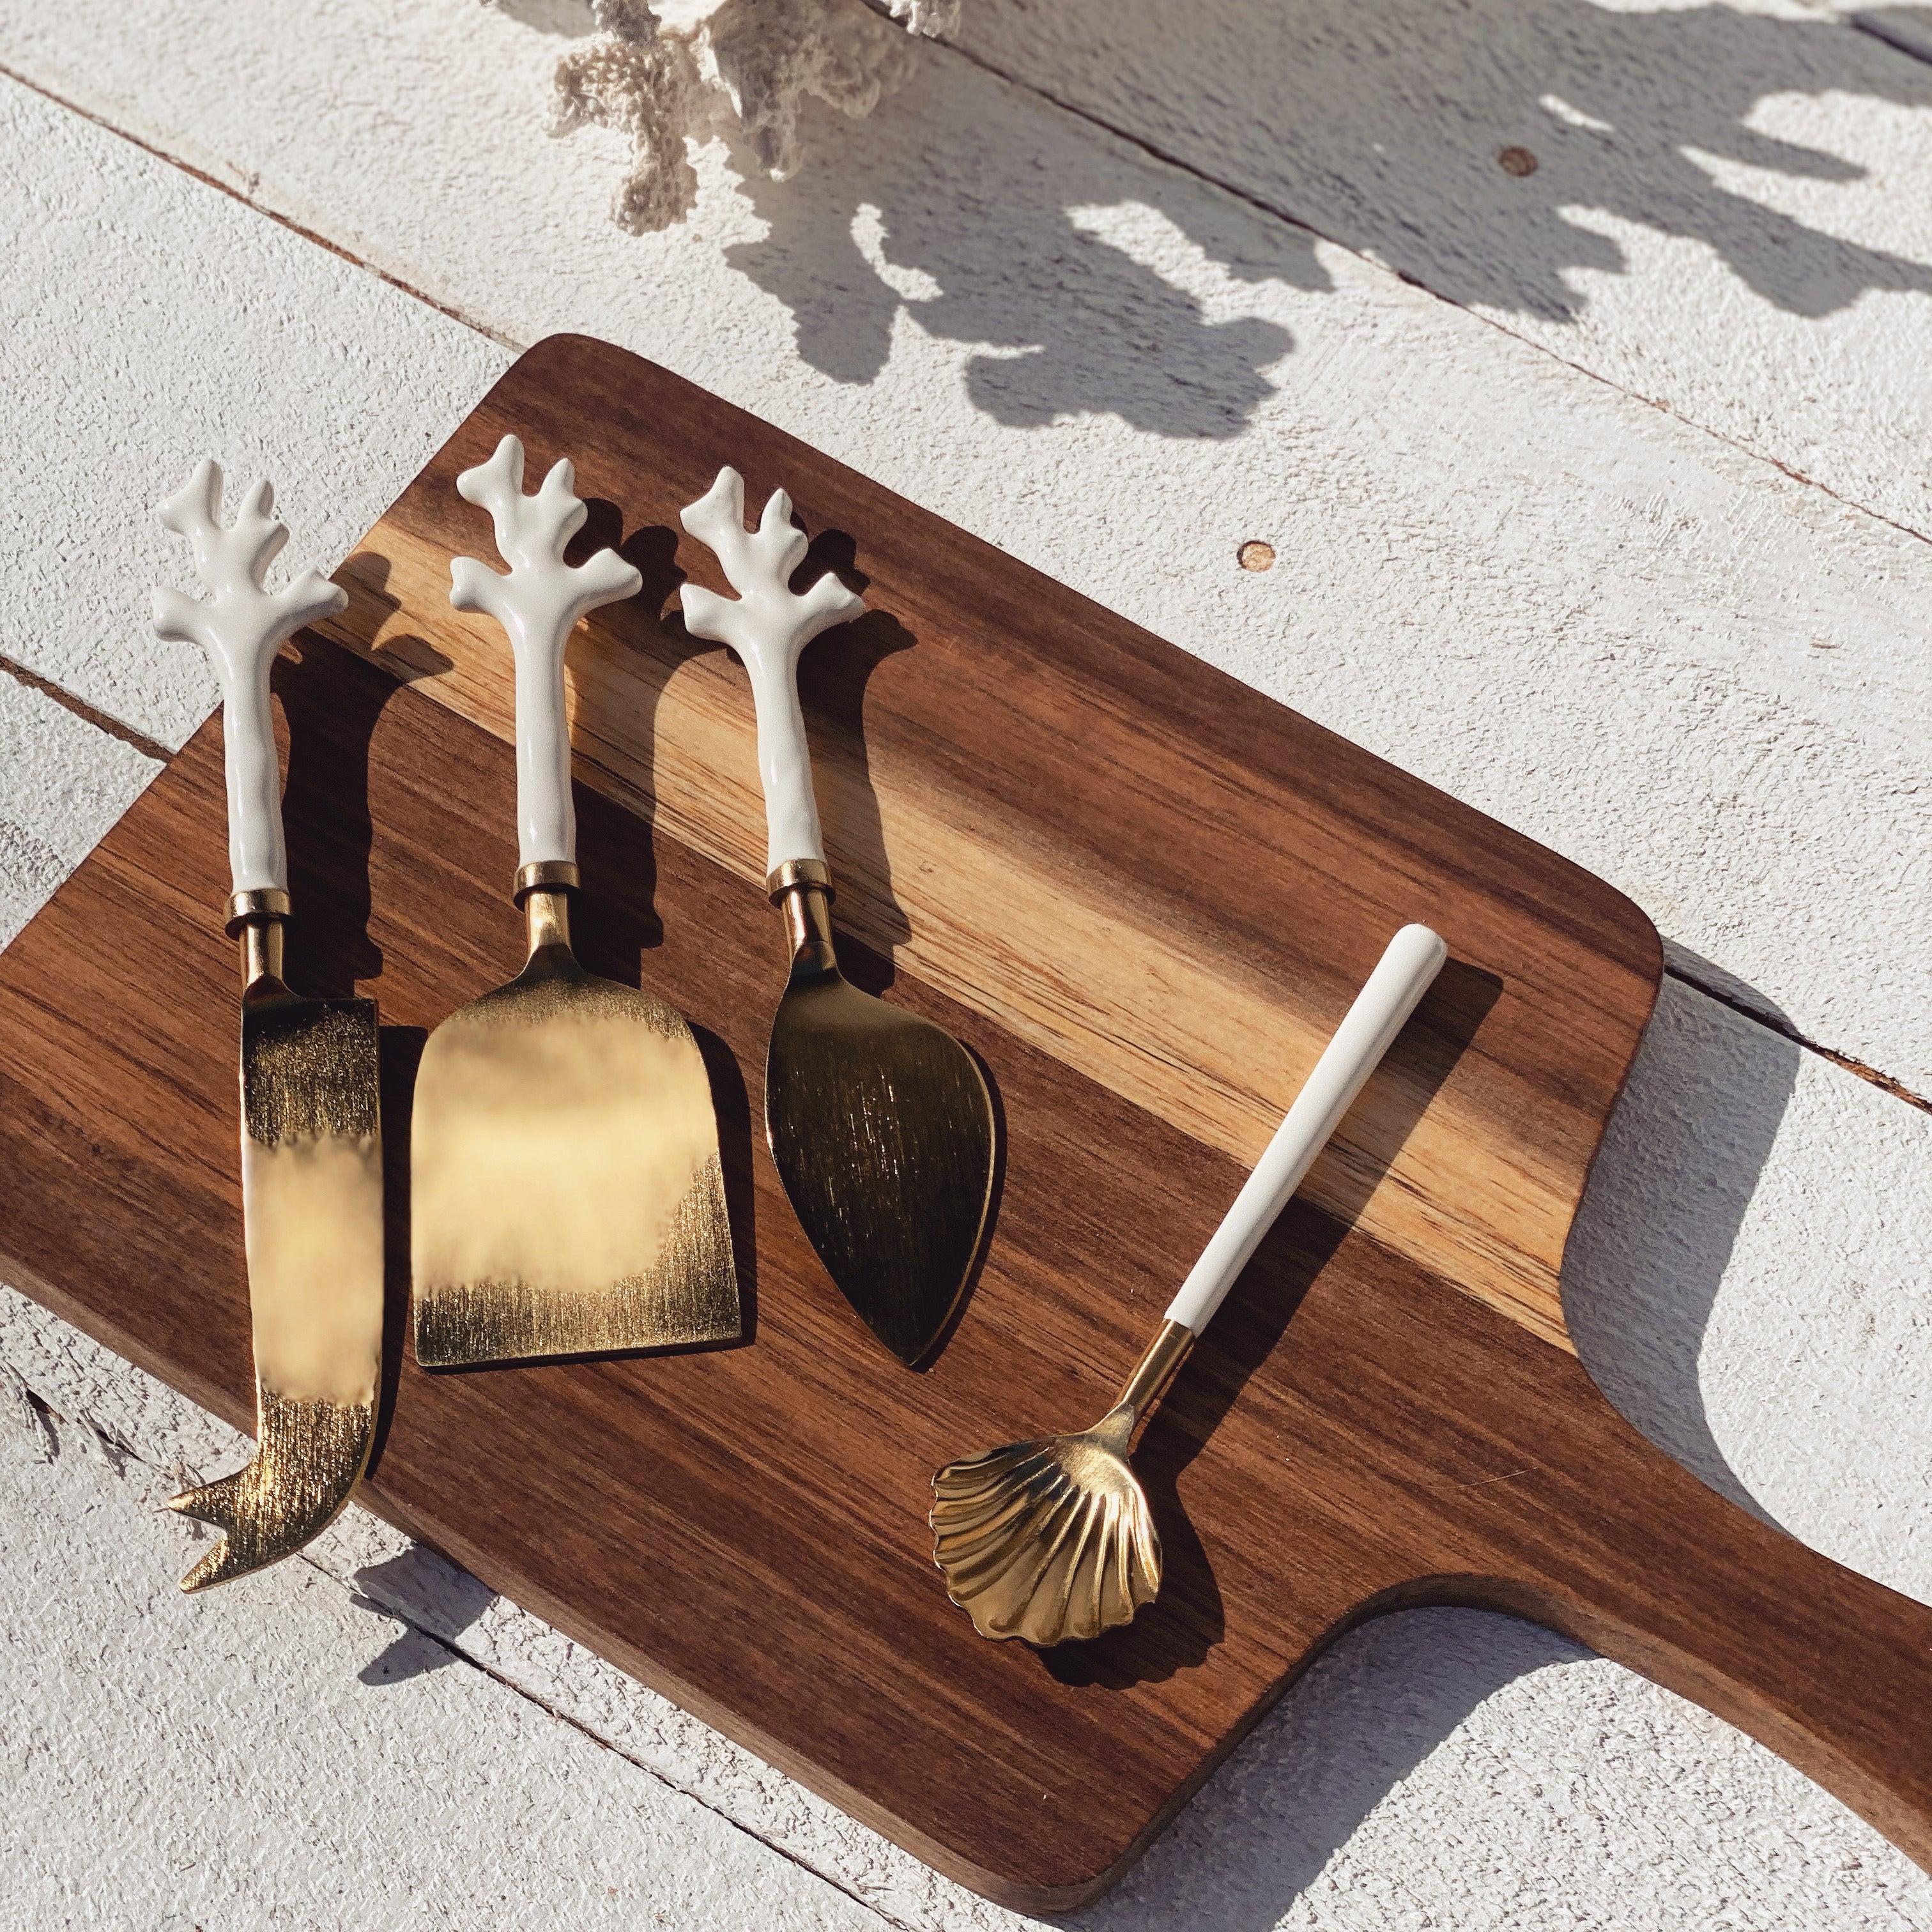 white coral cheese knife | set